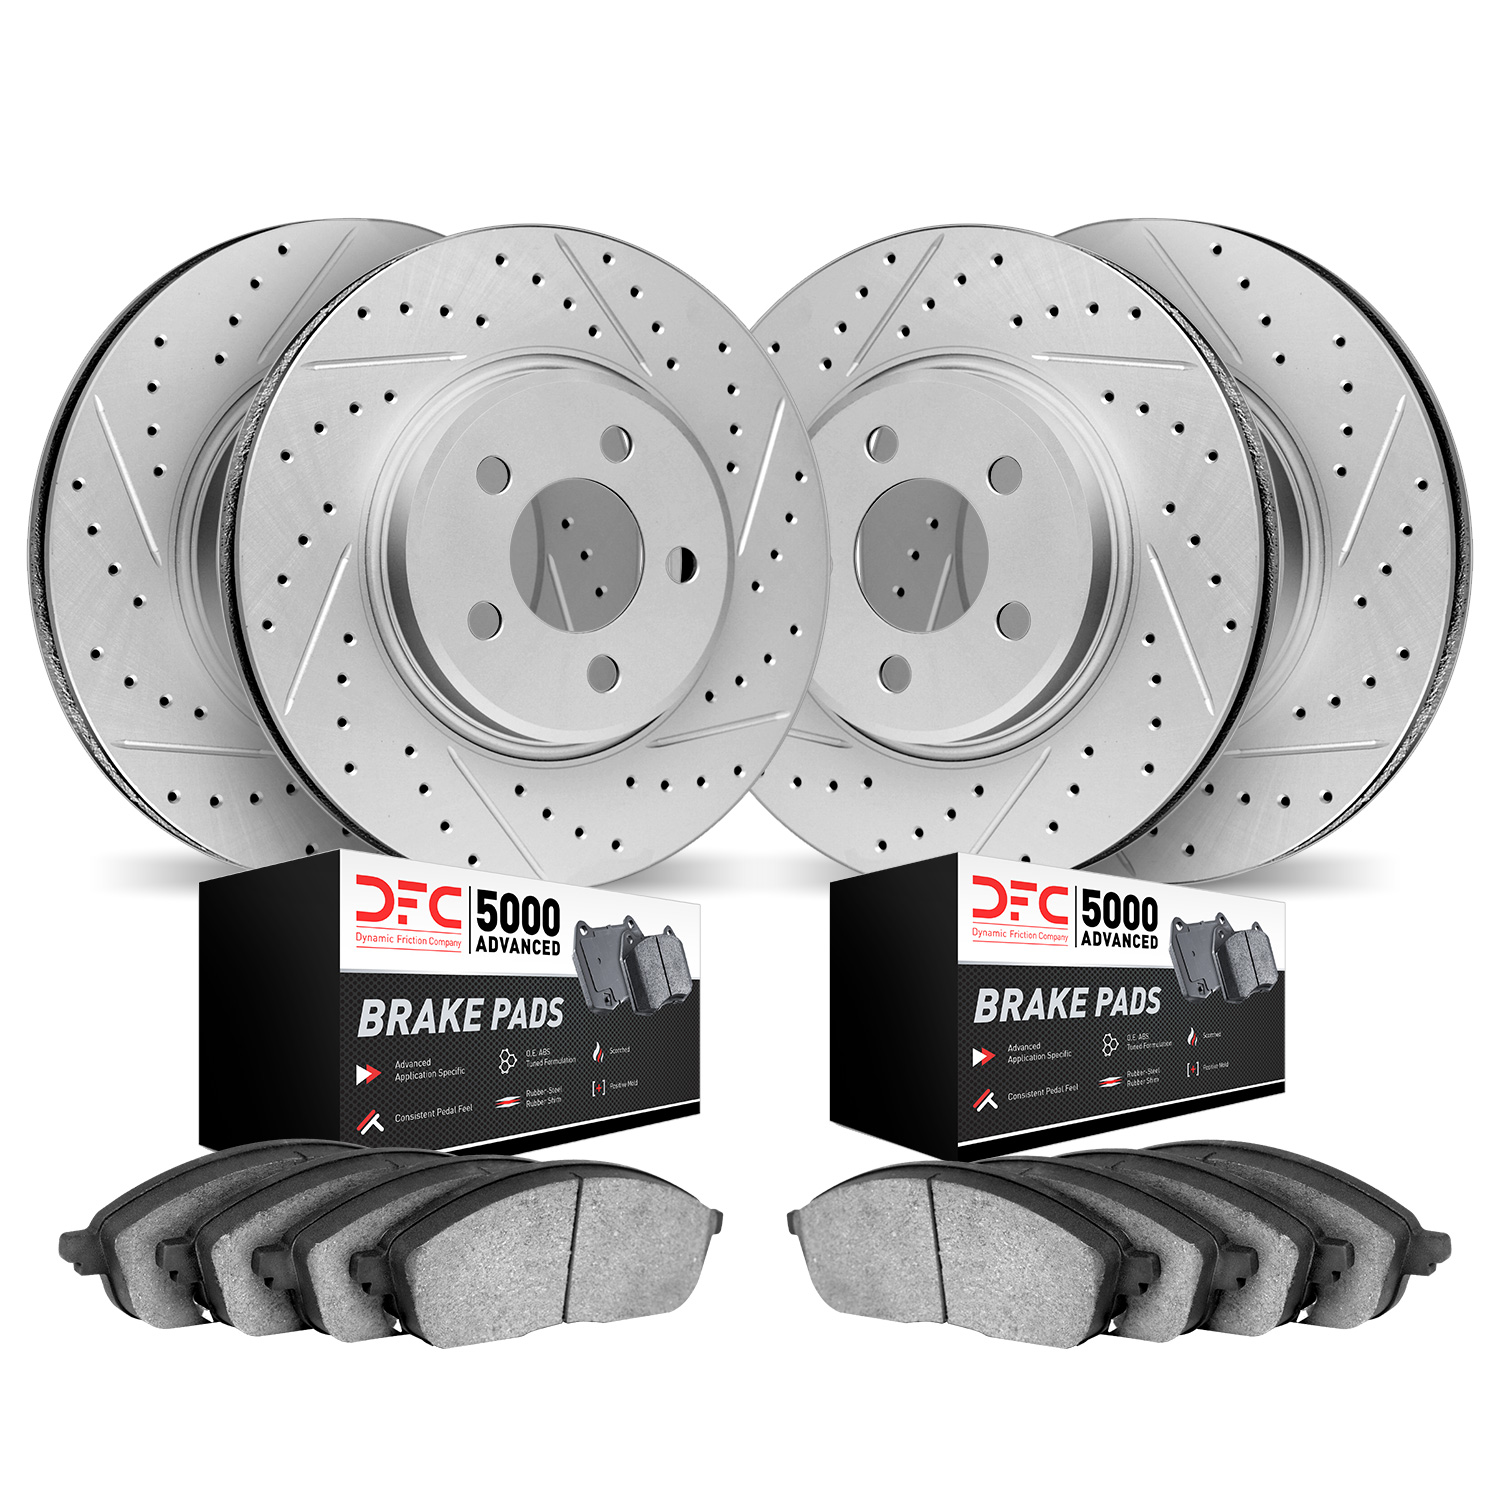 2504-31002 Geoperformance Drilled/Slotted Rotors w/5000 Advanced Brake Pads Kit, 2000-2003 BMW, Position: Front and Rear